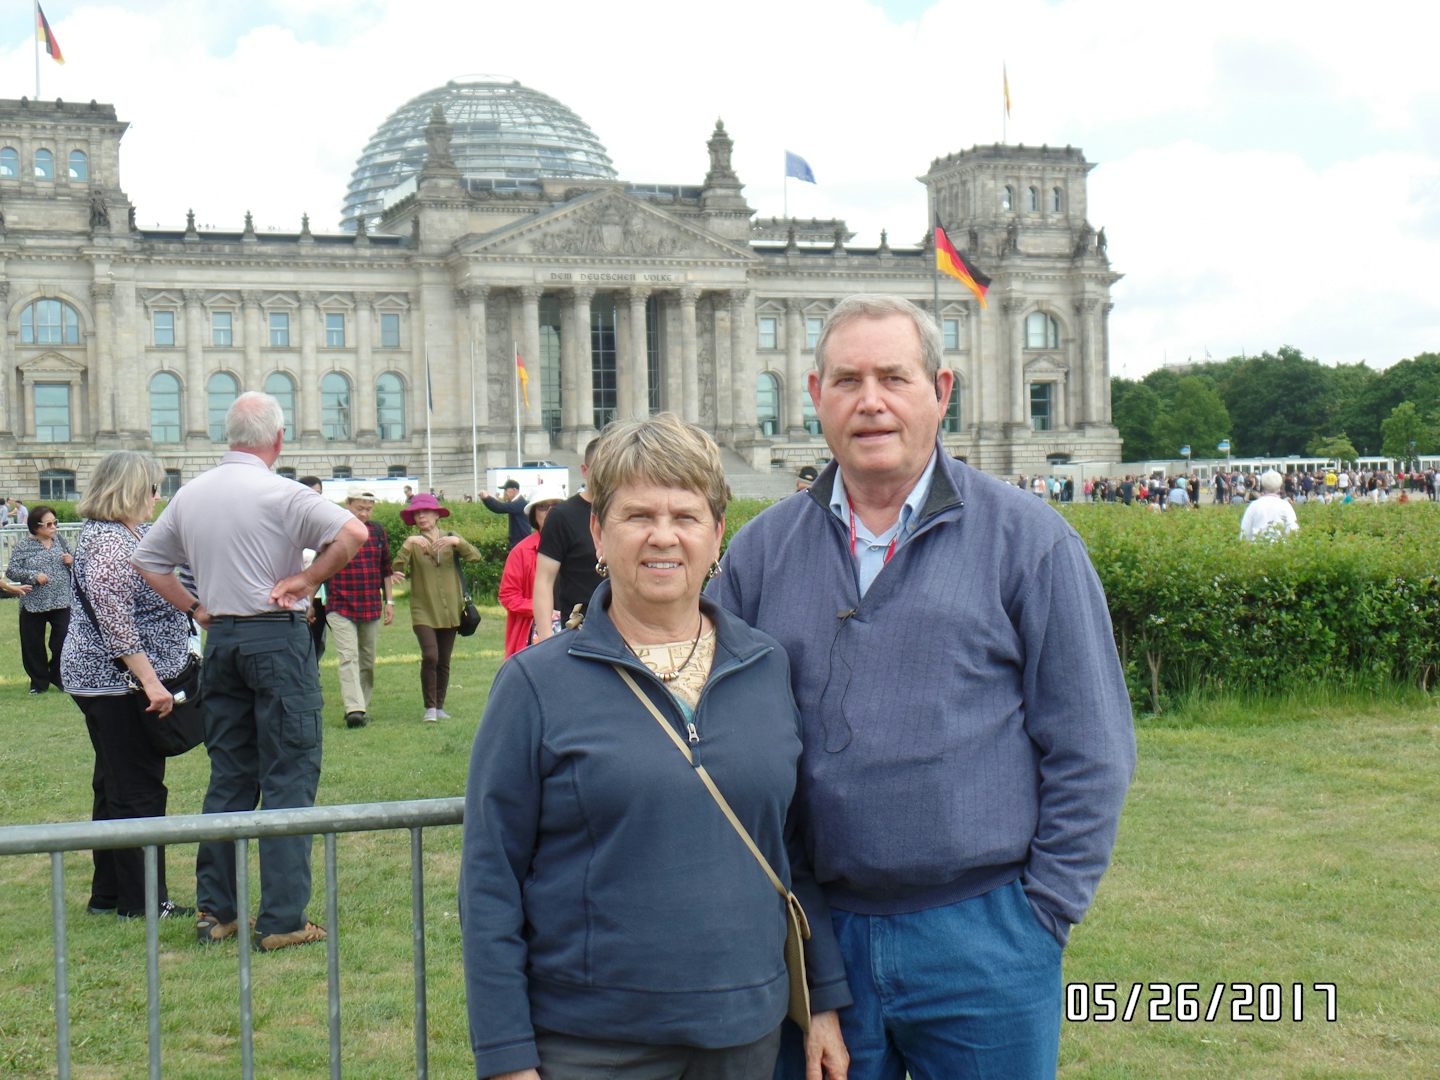 Berlin.  The day tour to the city.  A pleasant train ride brought us there.